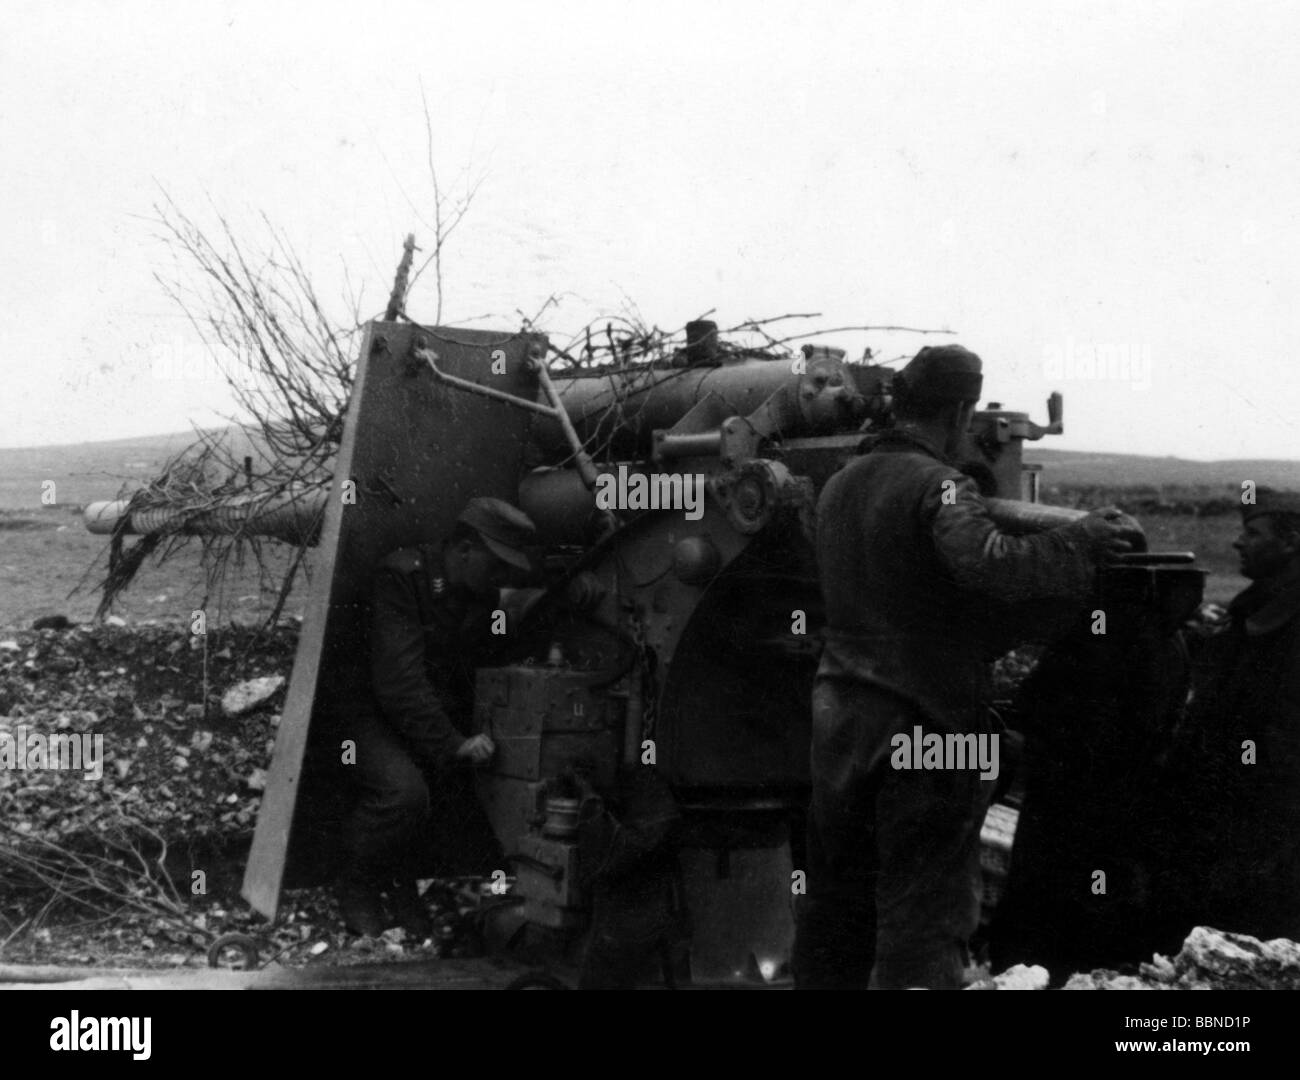 events, Second World War / WWII, Russia 1944 / 1945, Crimea, Sevastopol, German 88 mm anti-aircraft gun Flak 36/37 in firing position against ground targets, assistant gunner loading, 30.4.1944, Eastern Front, USSR, Wehrmacht, Luftwaffe, AA, guns, artillery, emplacement, gunners, gunner, shell, shield, 20th century, historic, historical, Soviet Union, soldiers, crew, 8.8 cm, people, 1940s, Stock Photo